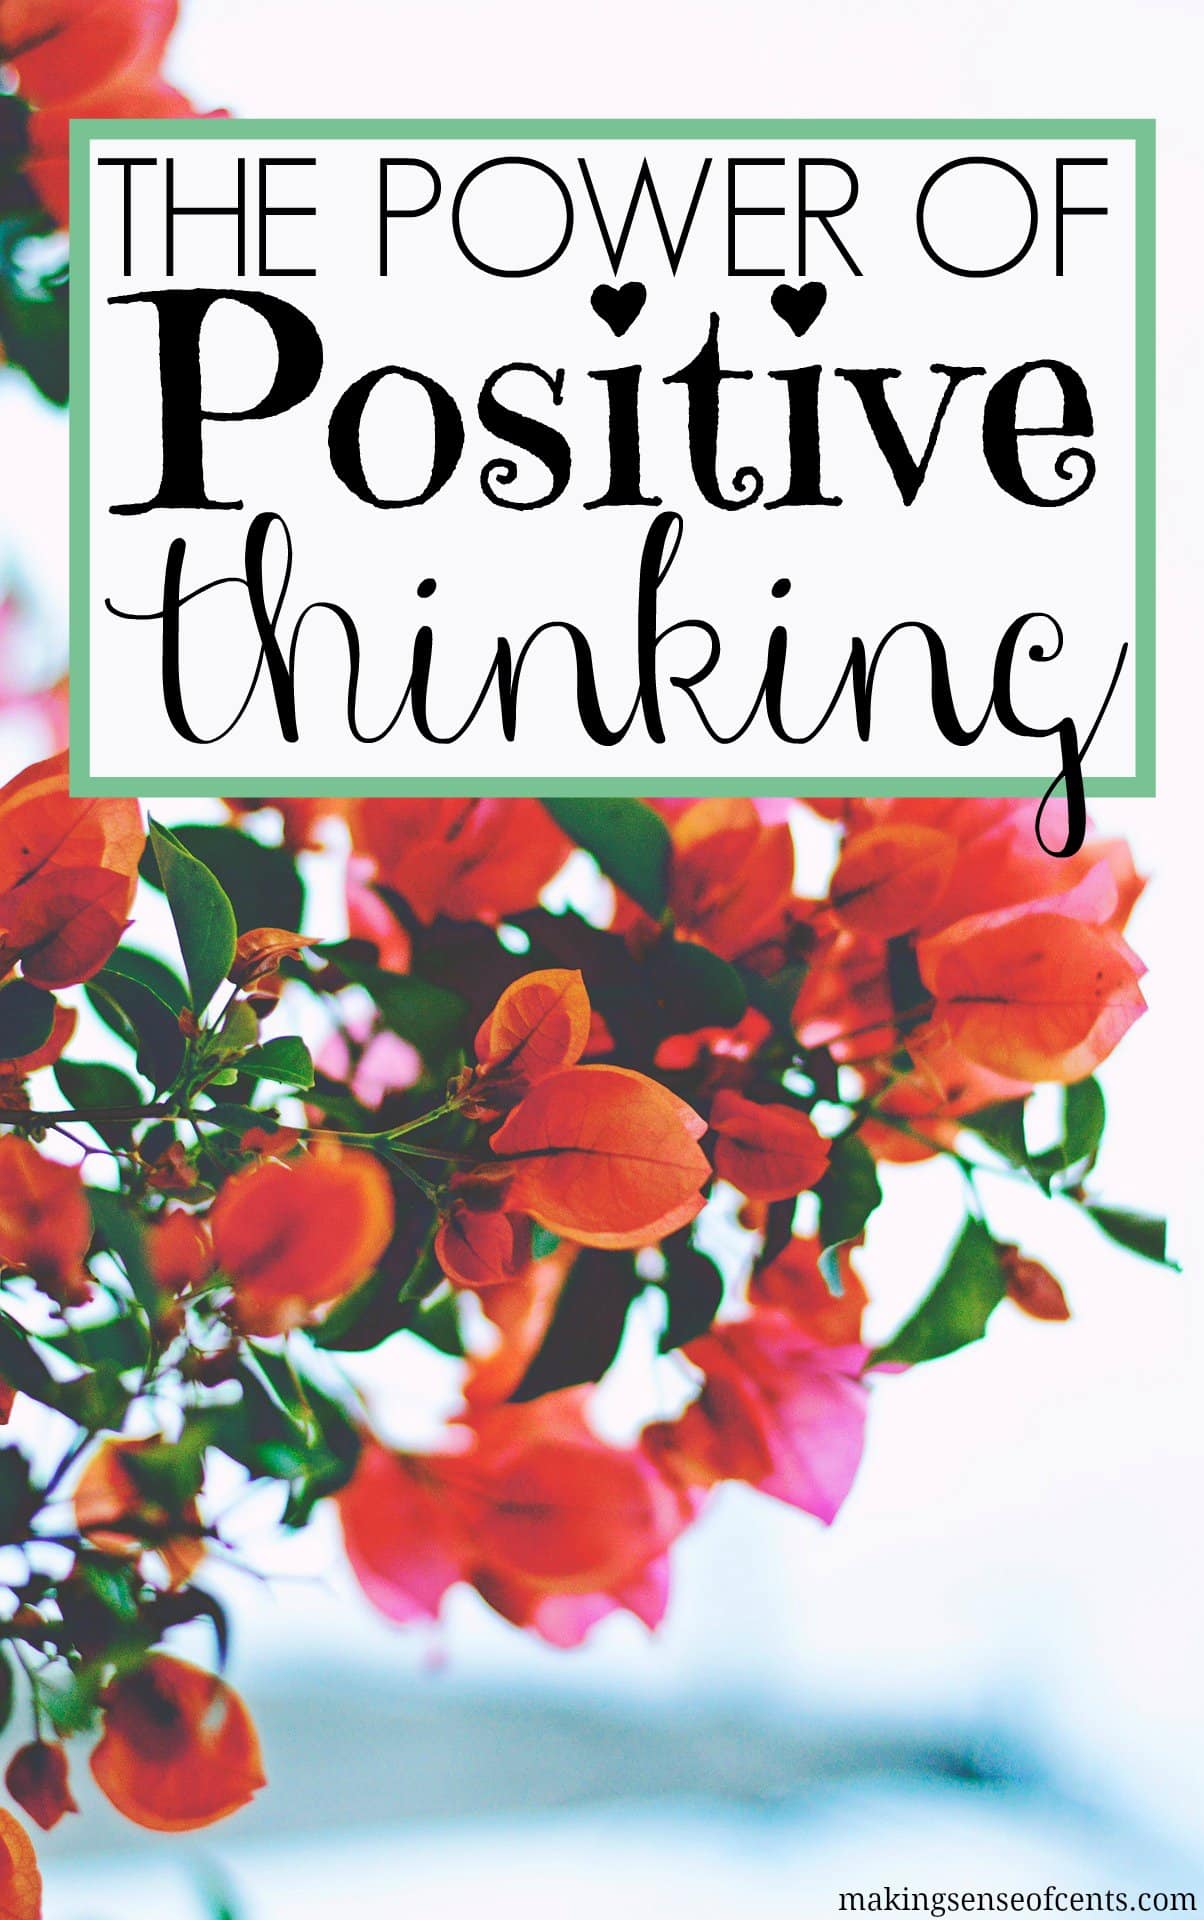 The Power Of Positive Thinking This Can Change Everything!